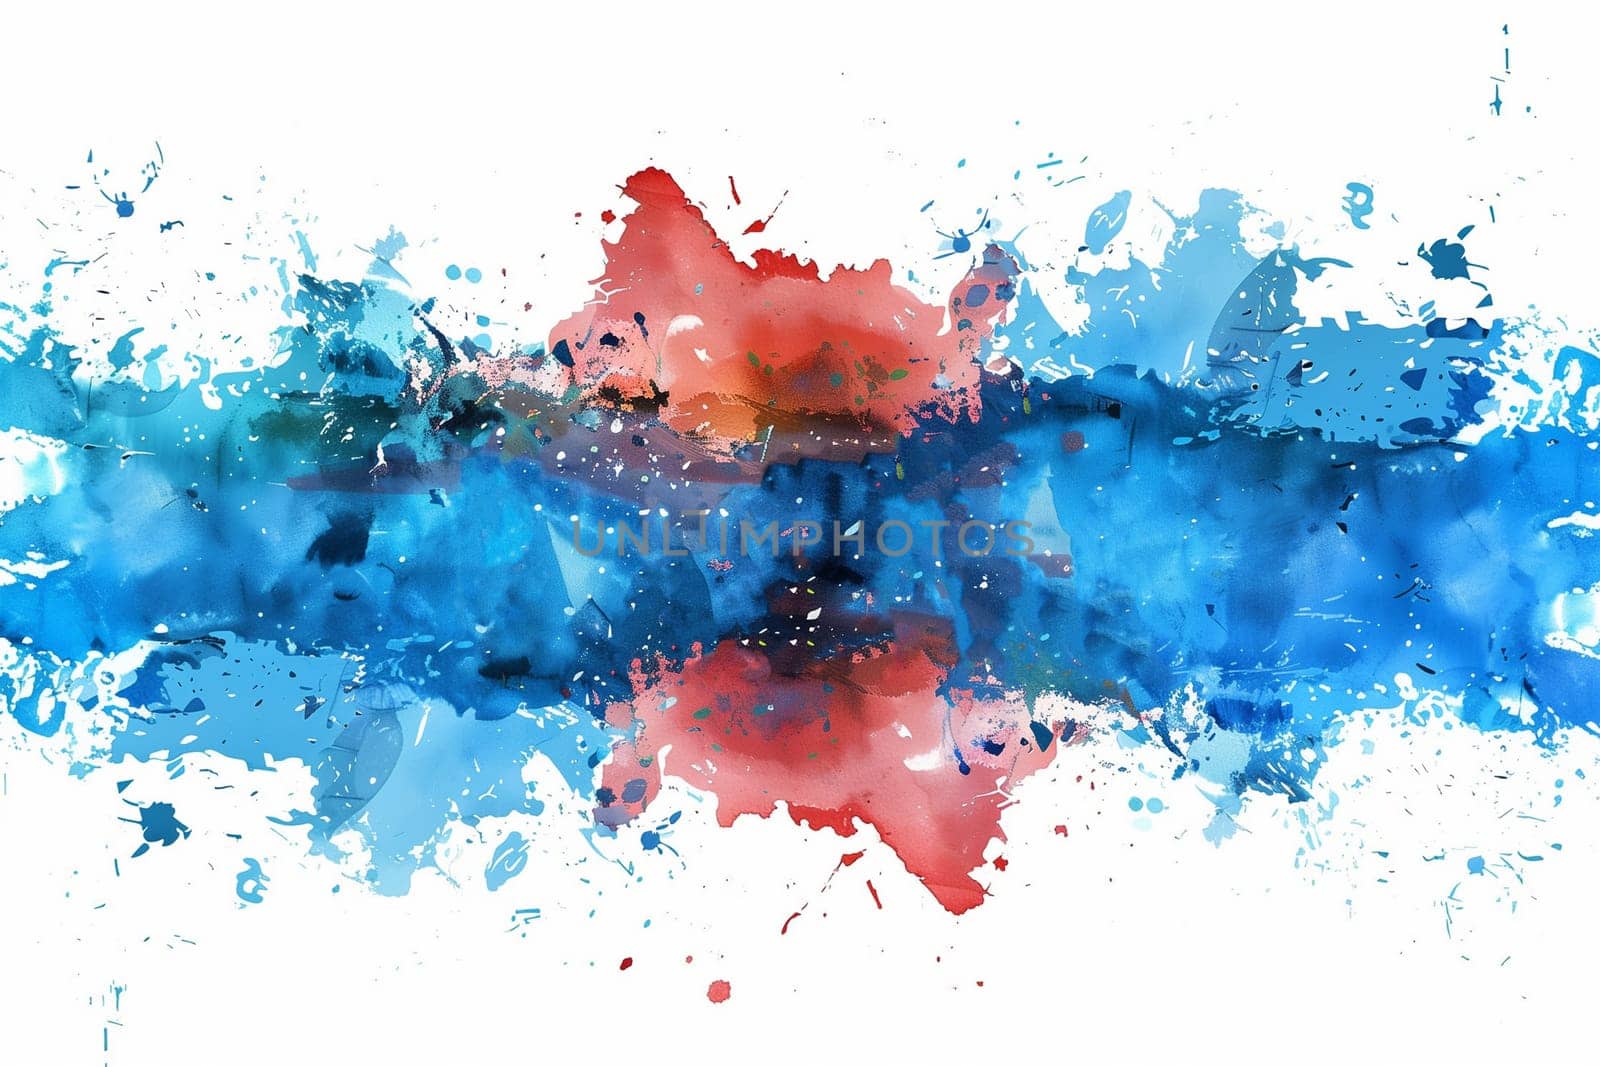 Blue and Red Paint Splattered on White Background by Sd28DimoN_1976